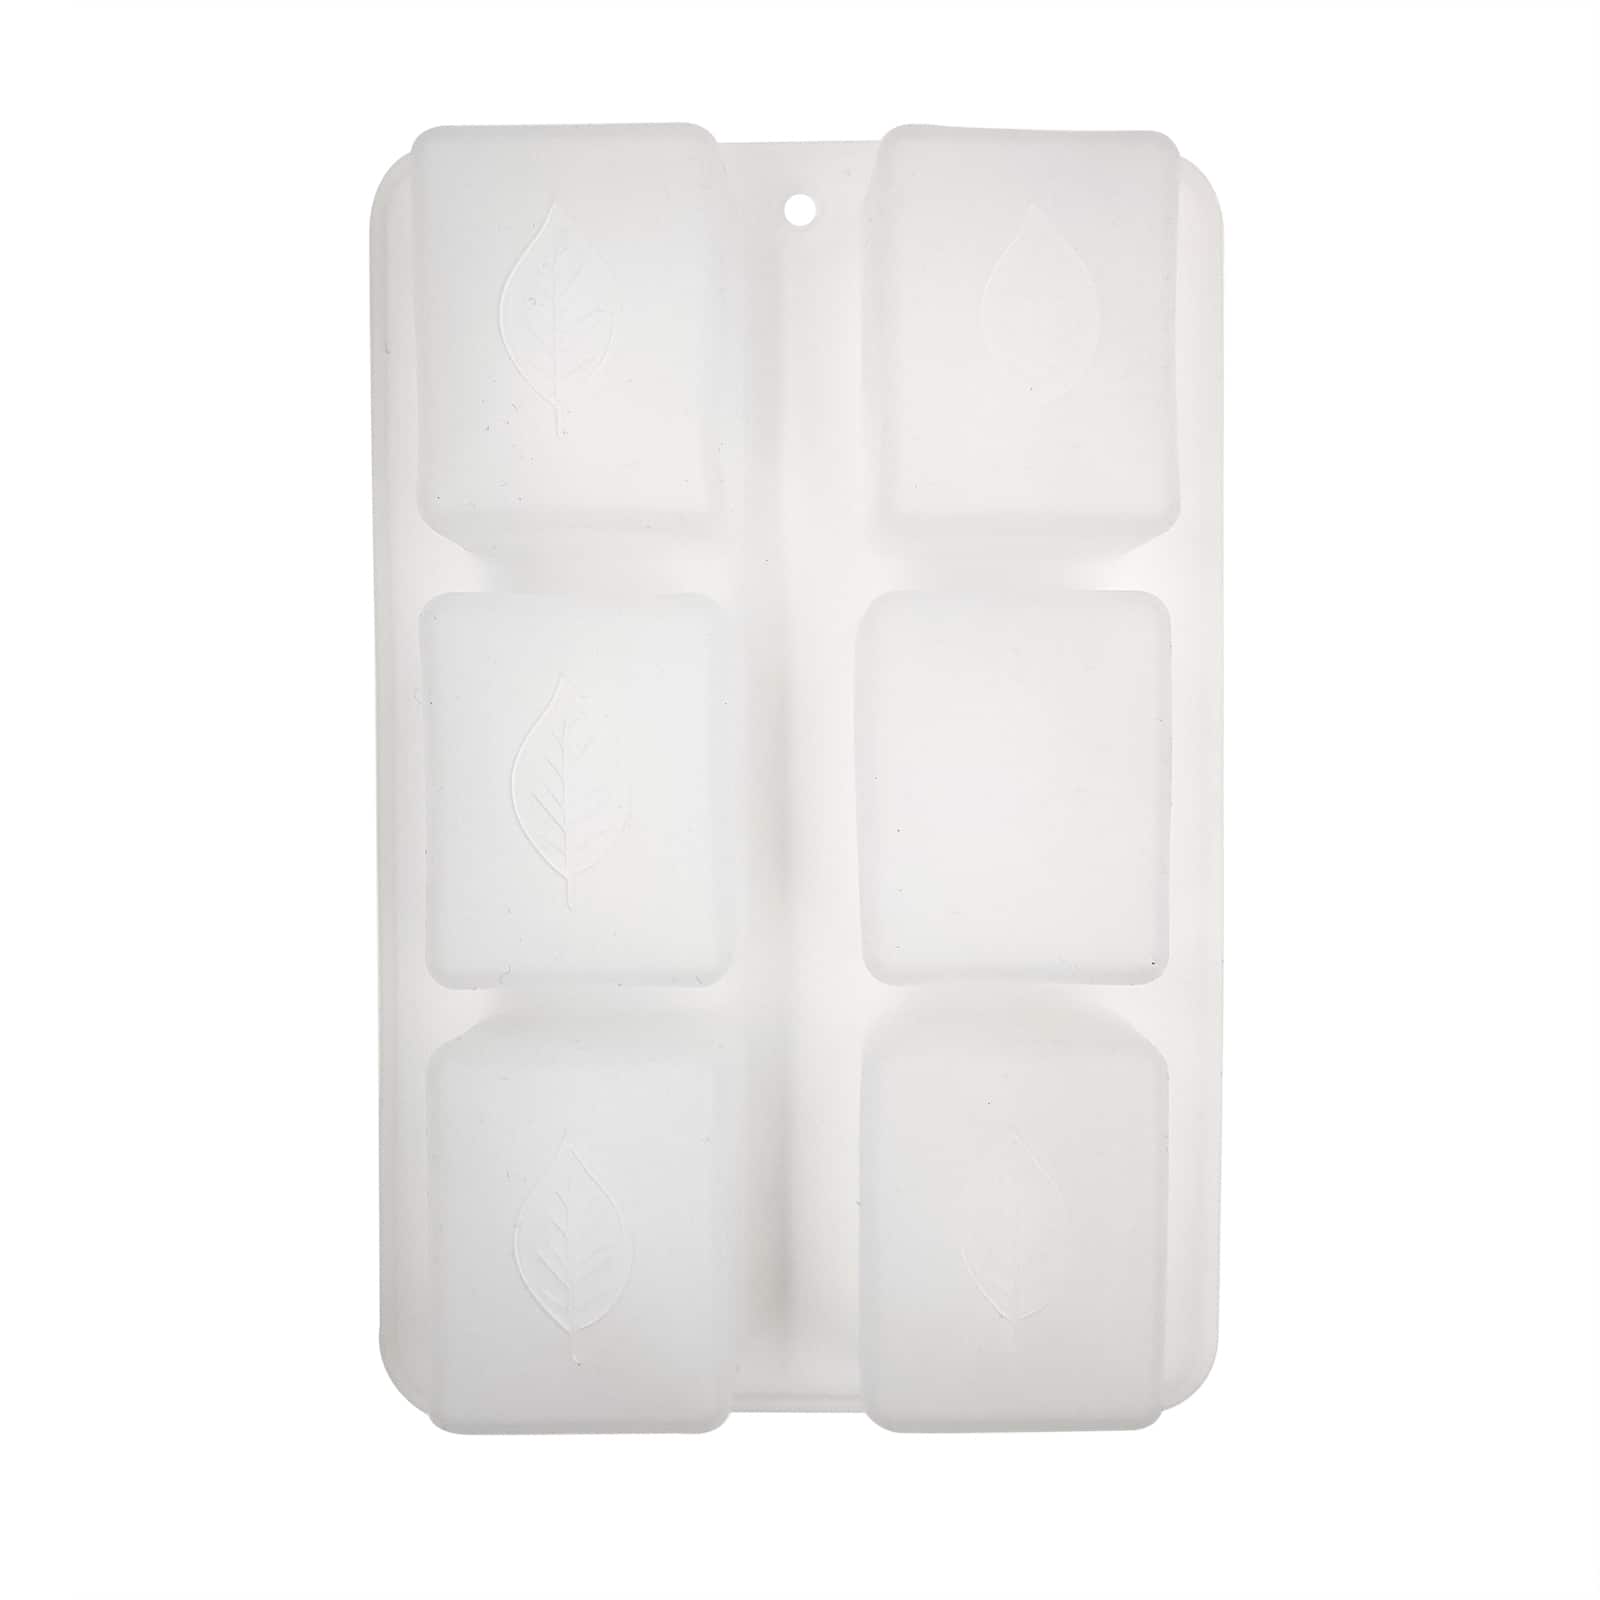 Leaf Pattern Silicone Square Soap Mold by Make Market&#xAE;